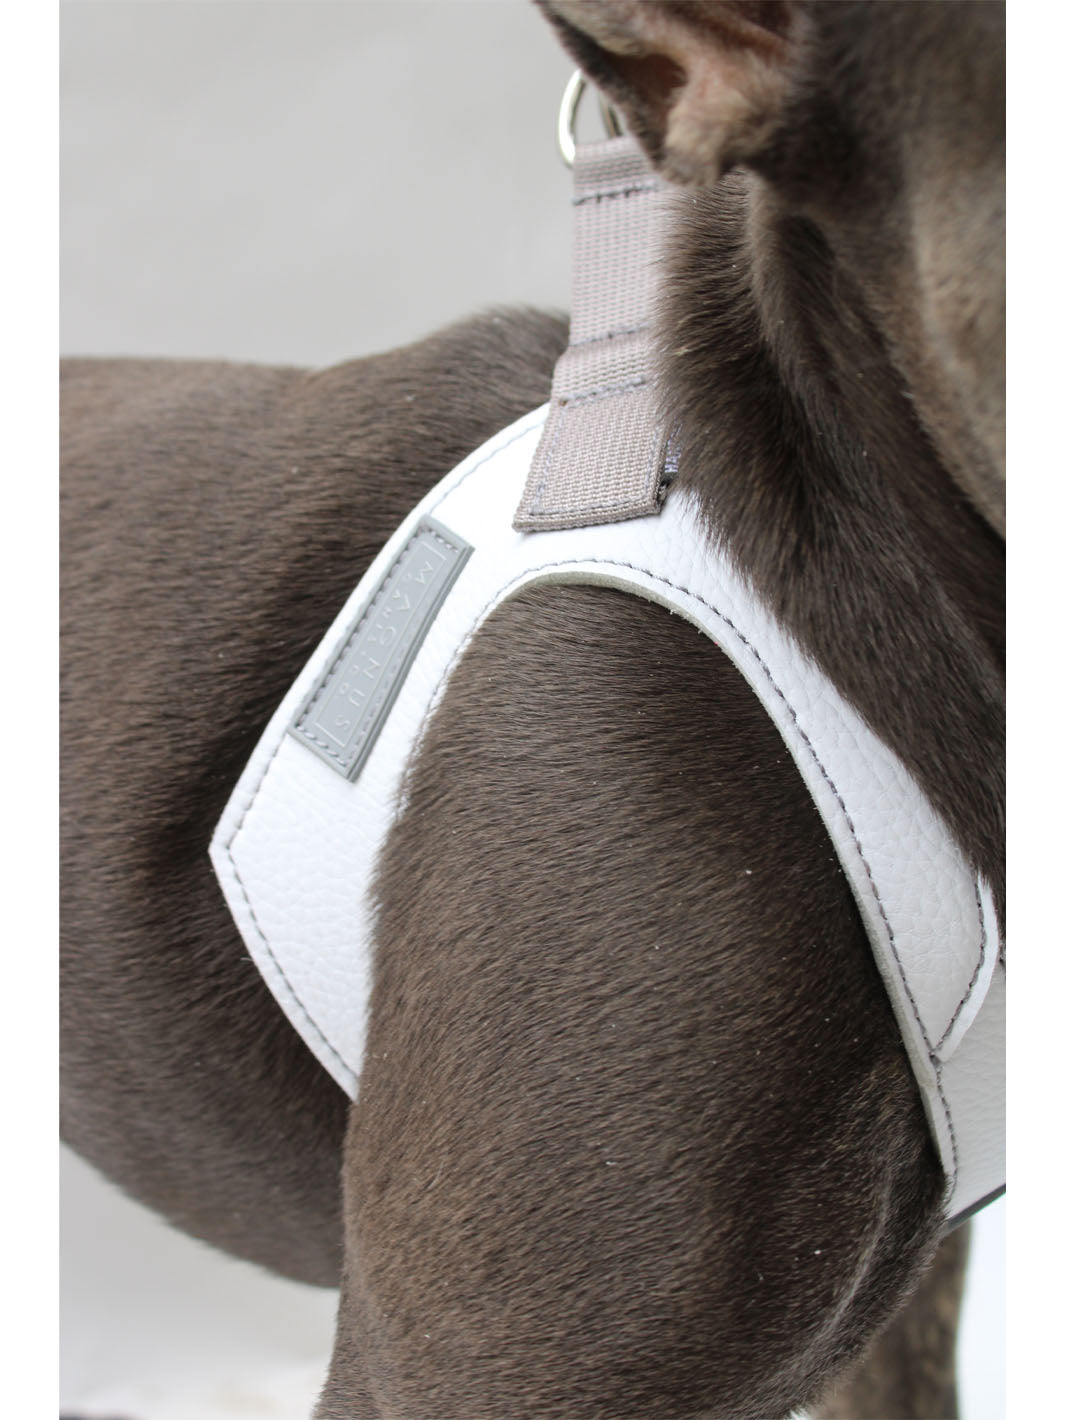 White leather dog harness on brindle frenchie.